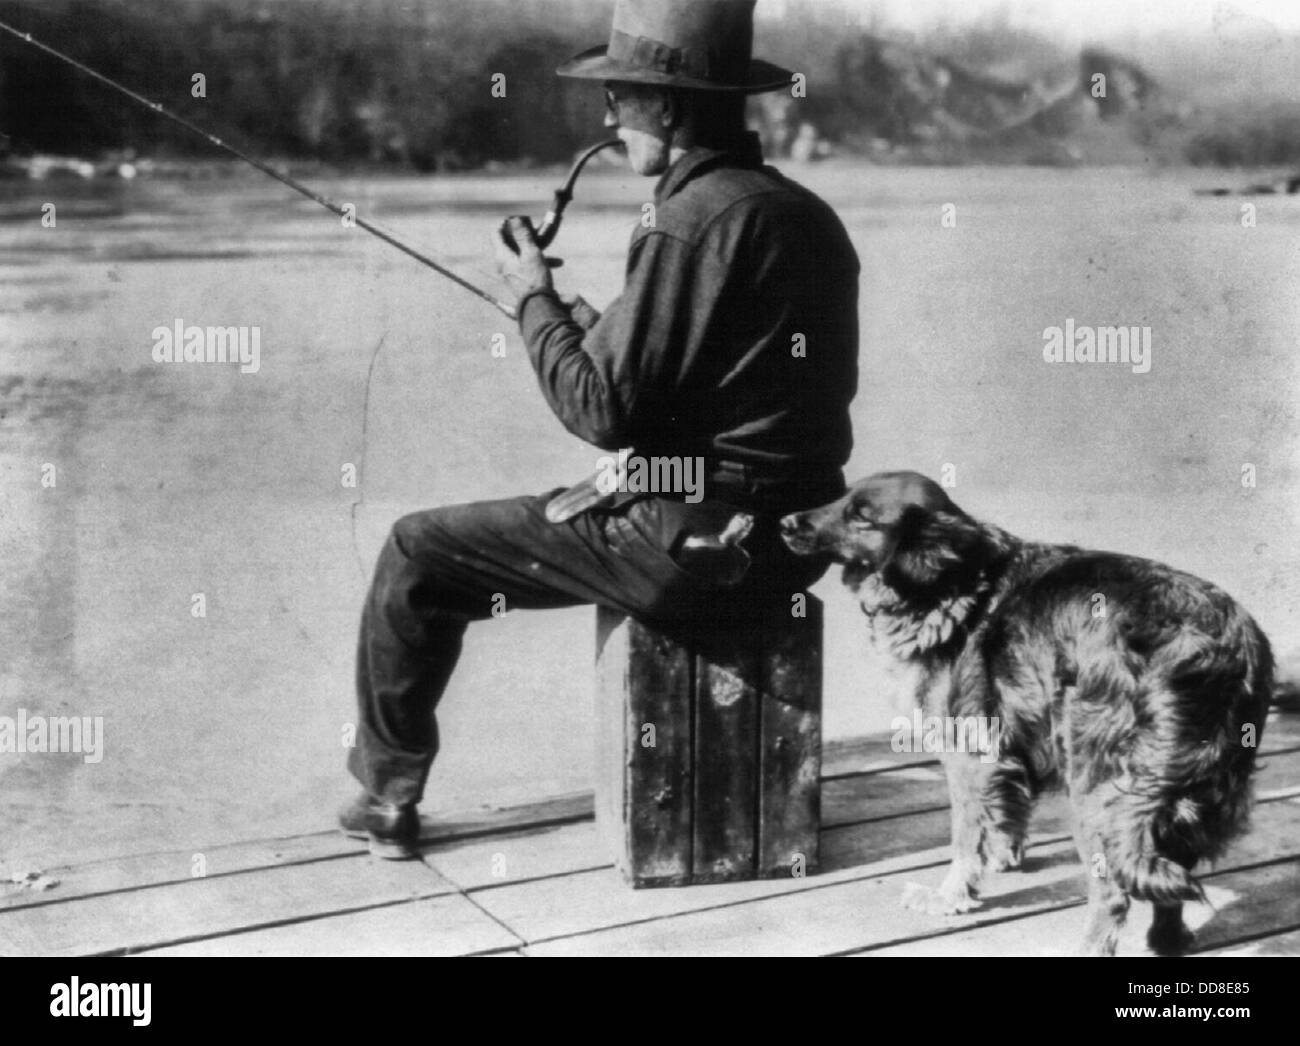 Hooch Hound, a dog trained to detect liquor, sniffs at flask in back pocket of man, seated, fishing on pier on the Potomac River, 1922, Prohibition America Stock Photo